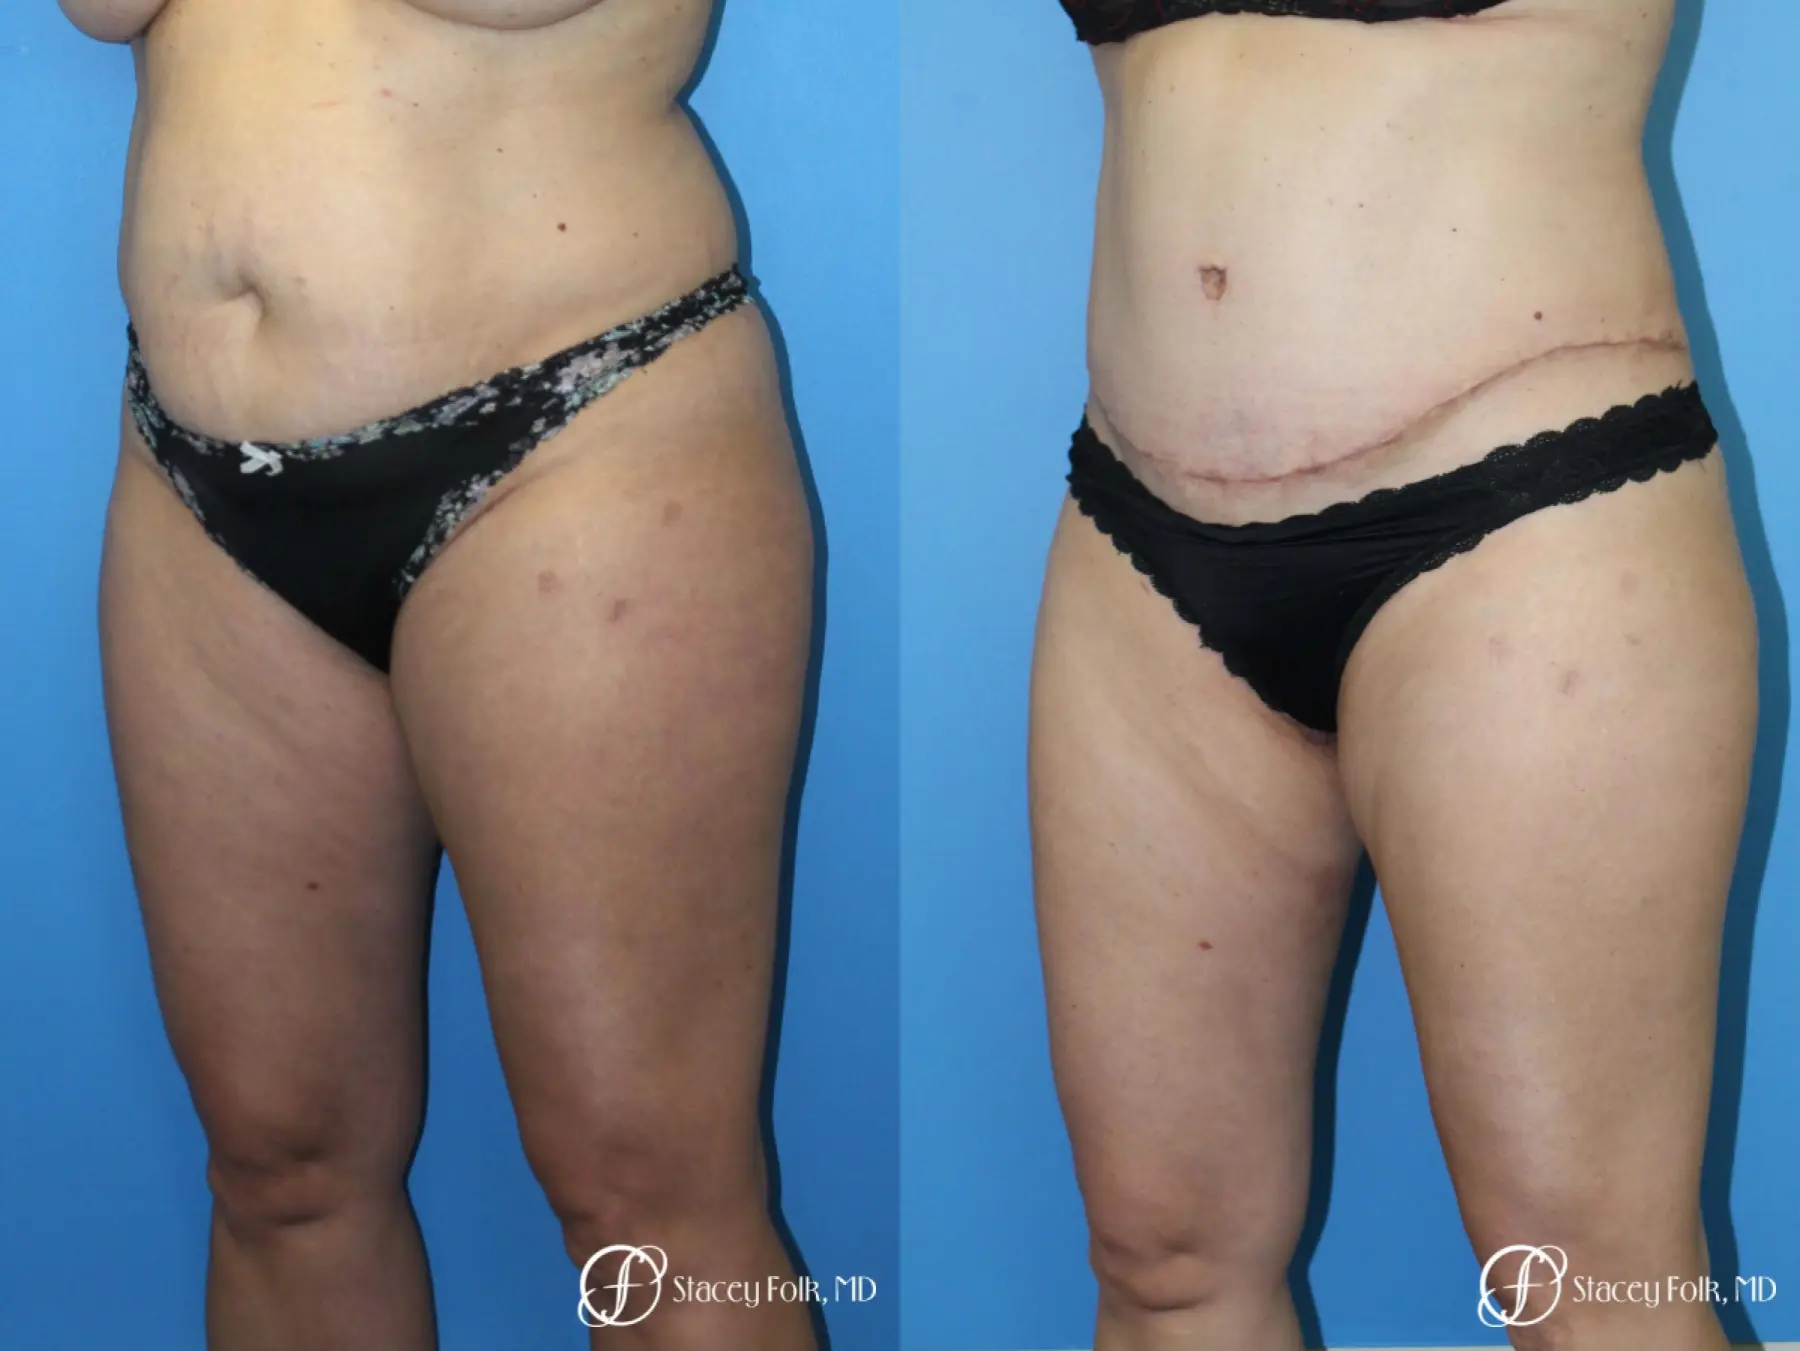 Liposuction, Tummy Tuck, Before and After Pictures